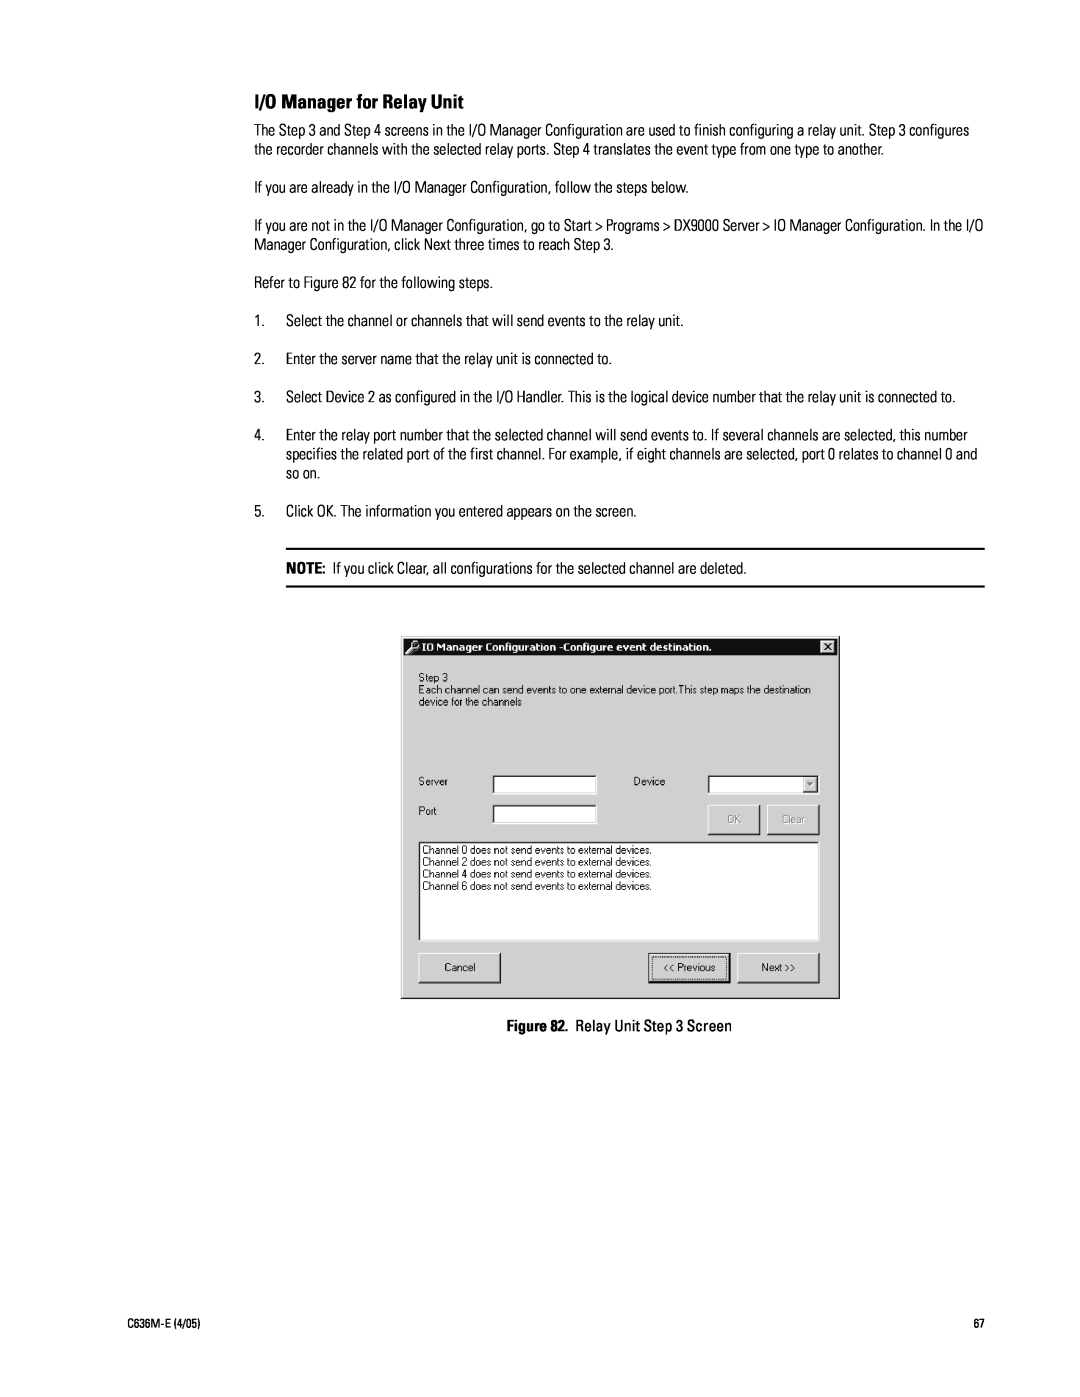 Pelco DX9100 installation manual I/O Manager for Relay Unit 